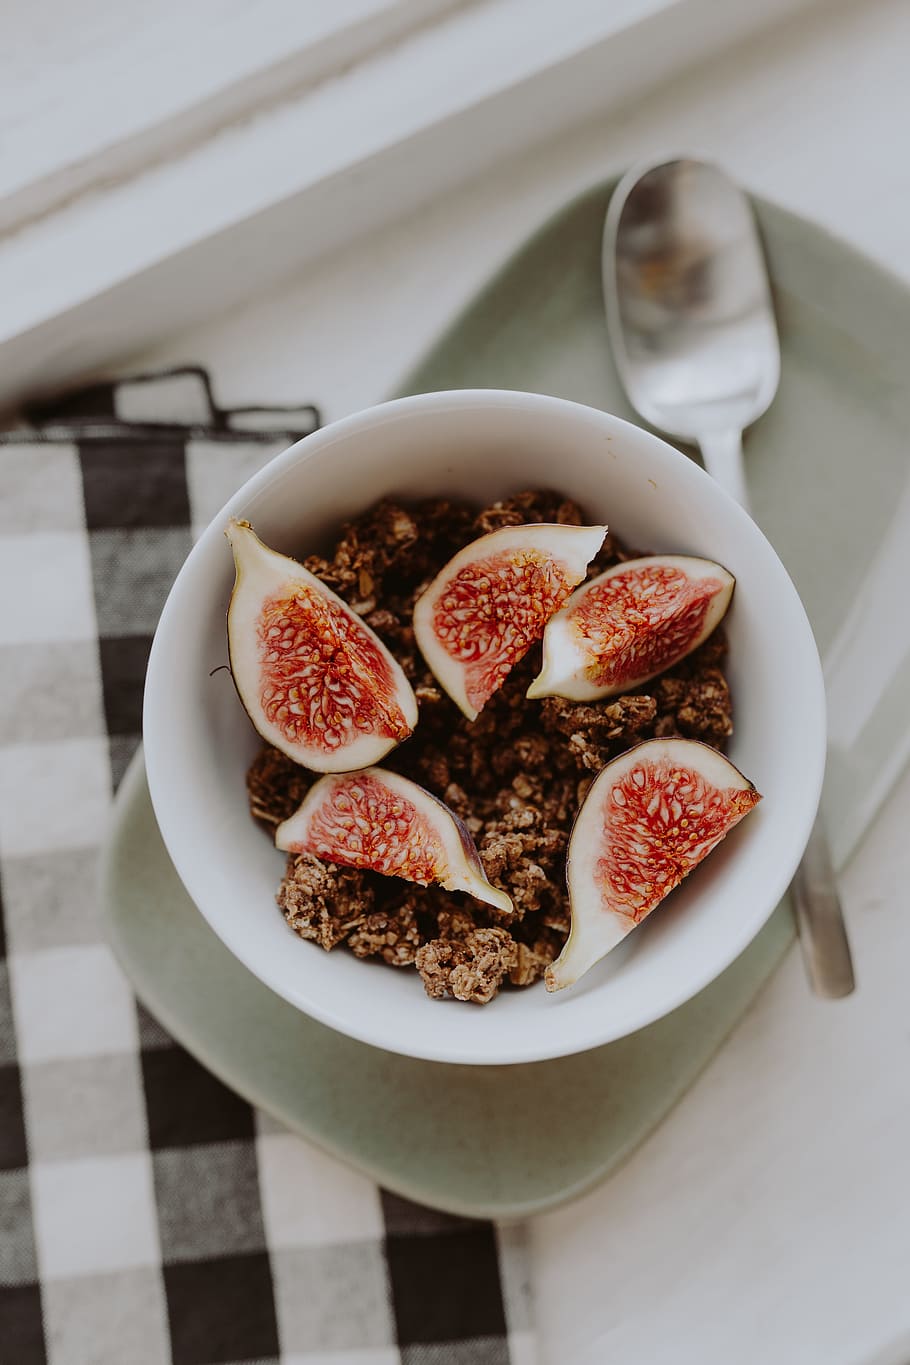 Bowl of crunchy granola and figs, breakfast, fruits, meal, morning